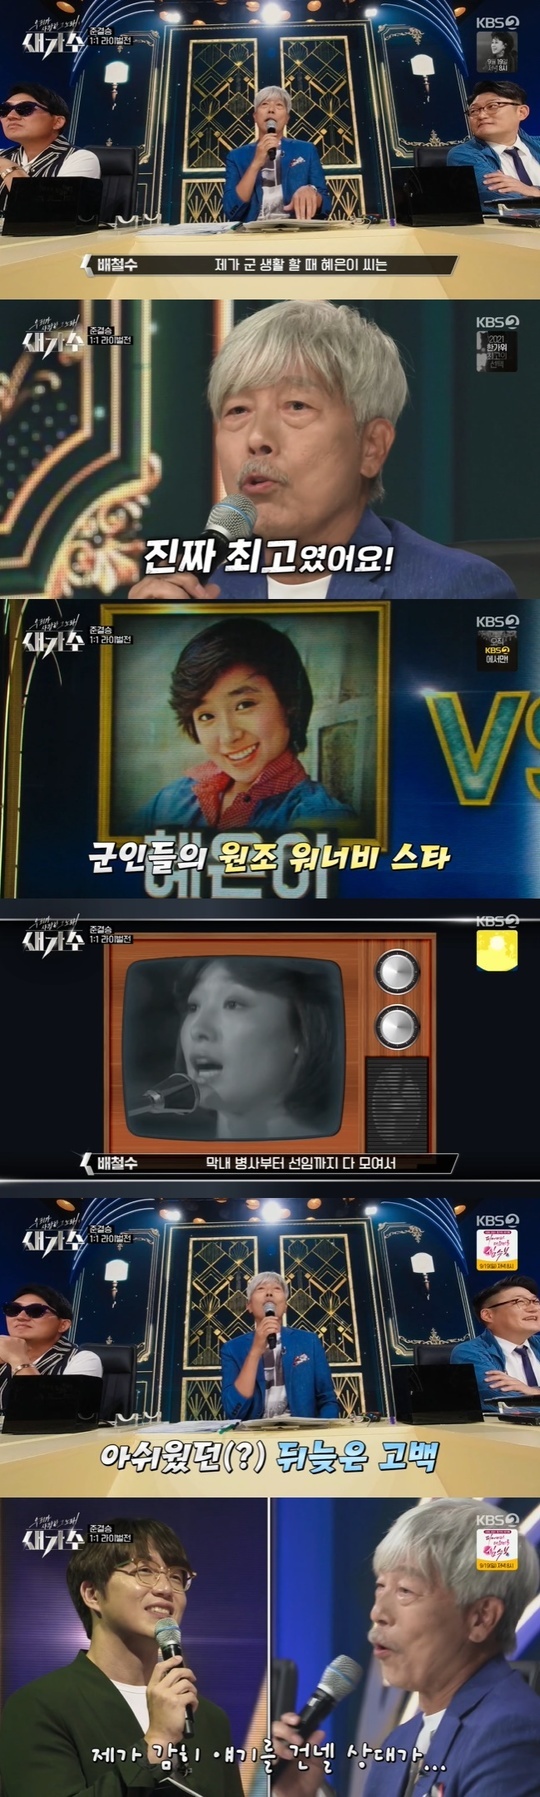 Bae Chul-soo Confessions Fanship for Hye Eun YiOn KBS 2TVs The Song We Loved, Bird Singer, which aired on September 11, the semi-final 1:1 Death Match rivalry followed.On the day of the show, the fourth match of the semi-finals was matched by Original national sister Hye Eun Yi and Girl Crush Lee Eun Ha as rivals.Bae Chul-soo said, When I was in the military, Hye Eun Yi was the best.Nowadays, when the armys interior ministry went to the office, they put different pictures, but at that time they were all Hye Eun Yi. Every time the youngest soldier gathered from the youngest soldier to the senior, the shout broke out.When Sung Si-kyung asked, Was it so popular, Bae Chul-soo emphasized, It was the best.I had a Confessions later with Mr. Hye Eun Yi and he said, Why dont you tell me now? said Bae Chul-soo.Sung Si-kyung asked why he did not do Confessions at the time. Bae Chul-soo explained, I was not the one to talk to.